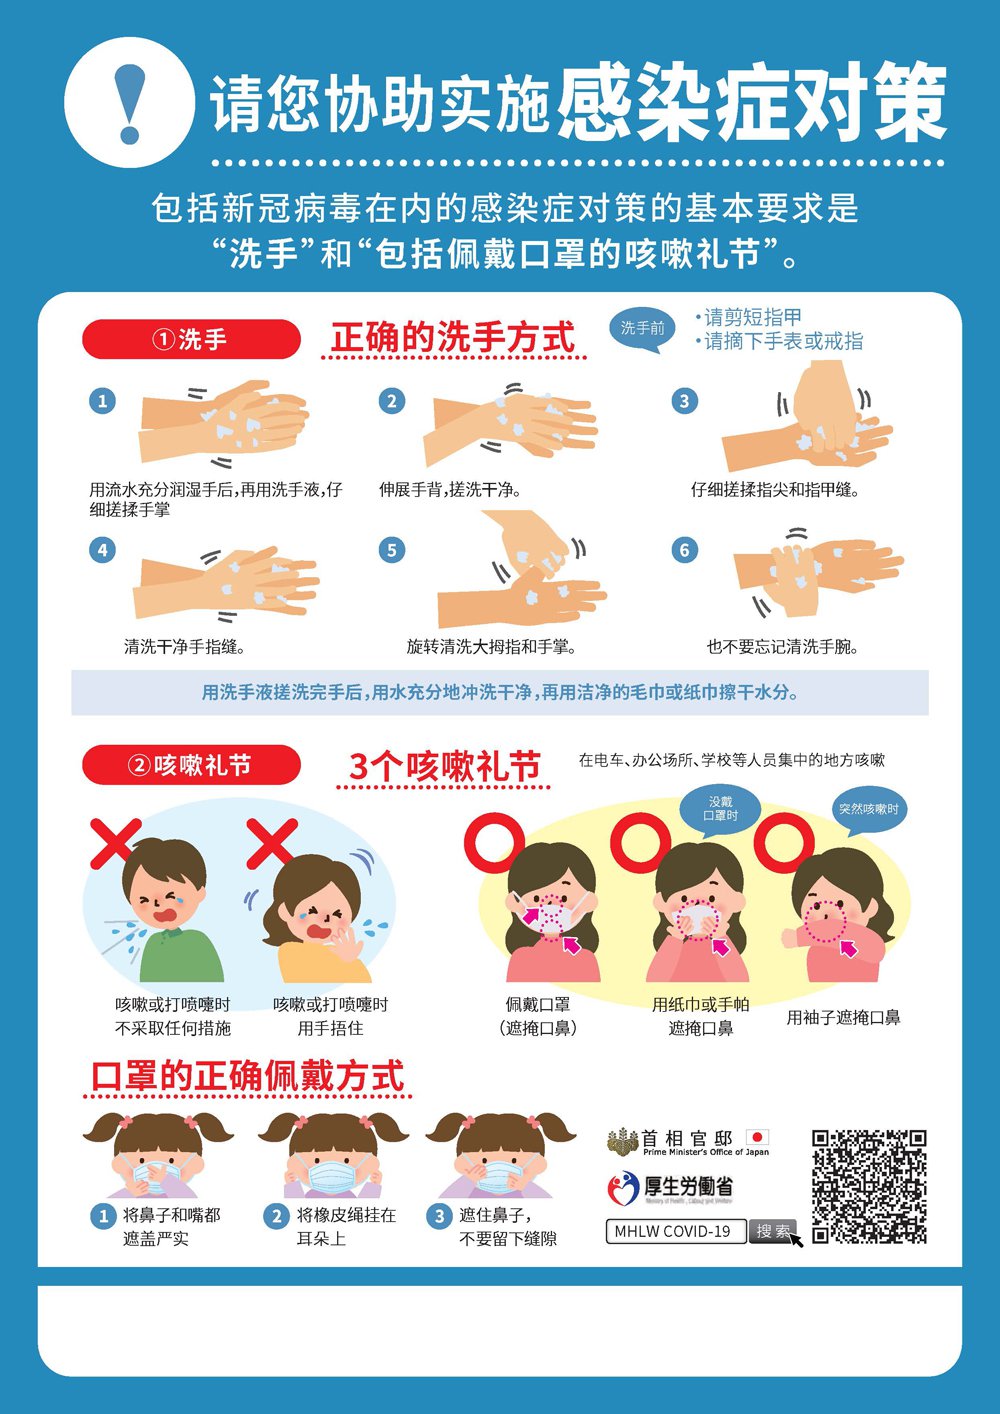 zh-cn.infection_control_measures-vertical.1000.jpg